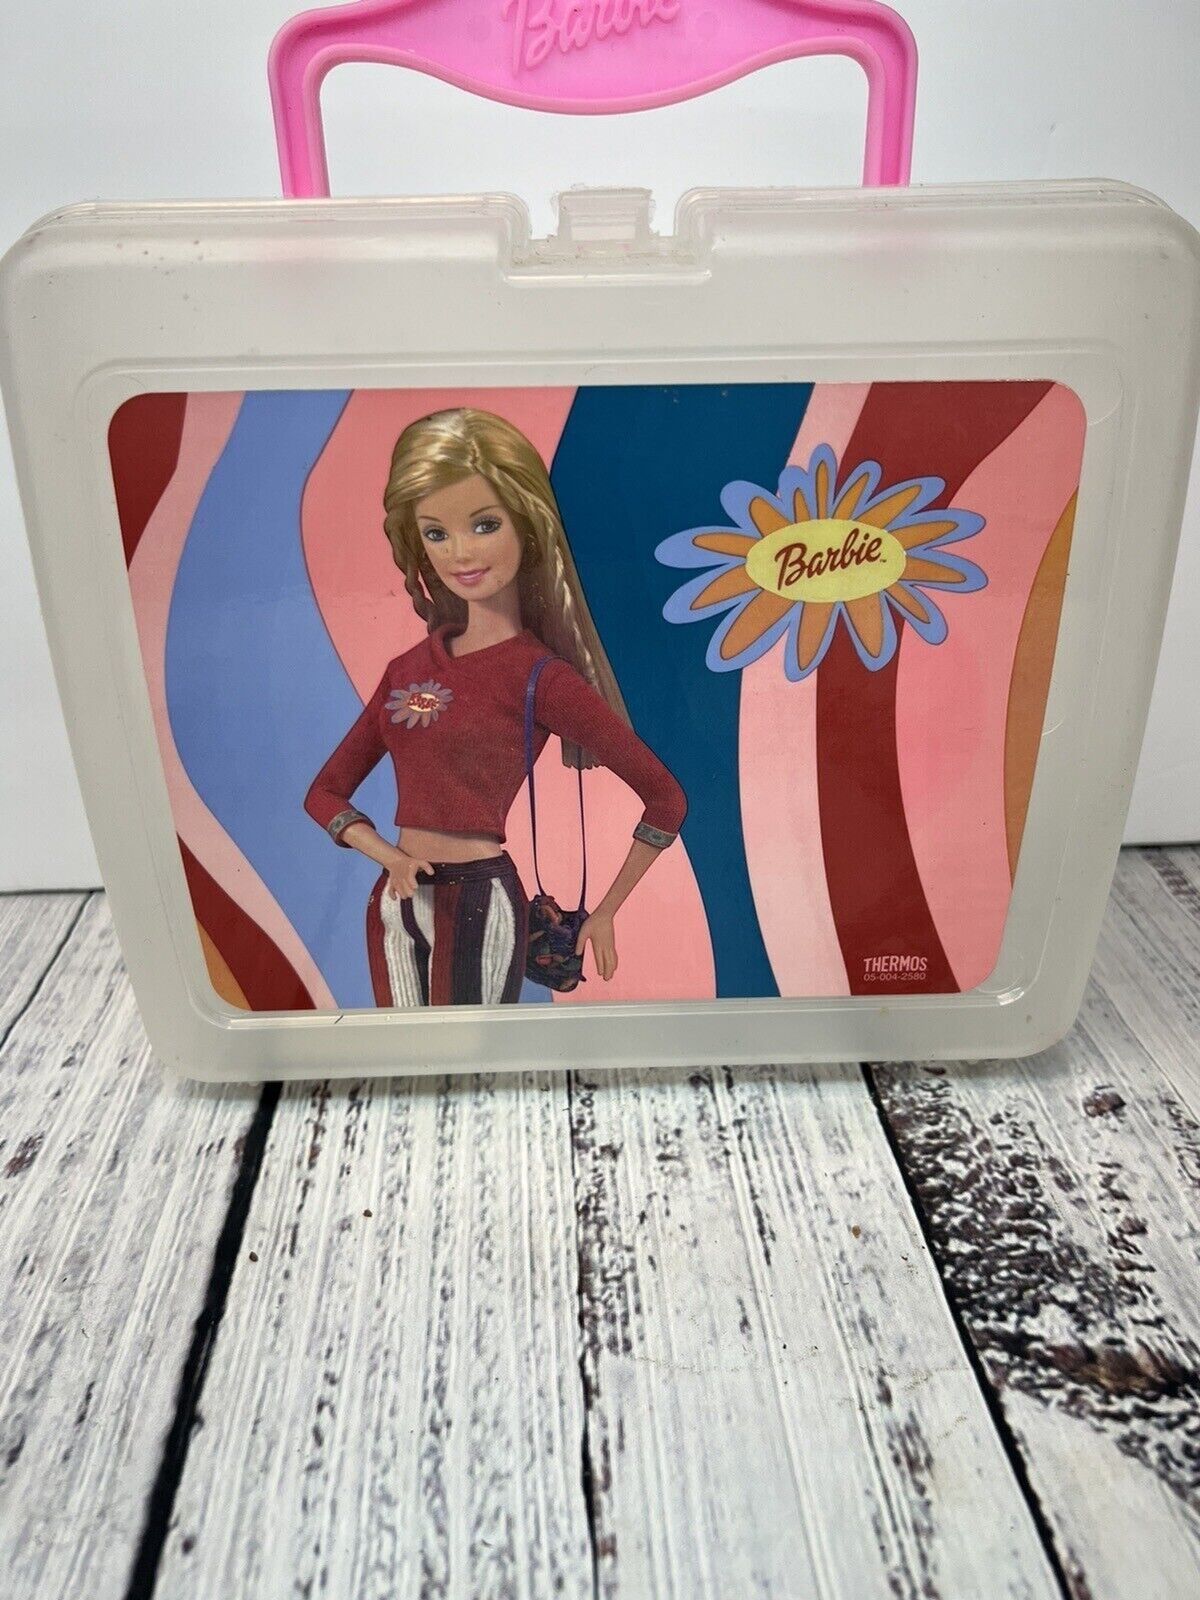 Vintage Barbie Doll Lunch Box by Thermos